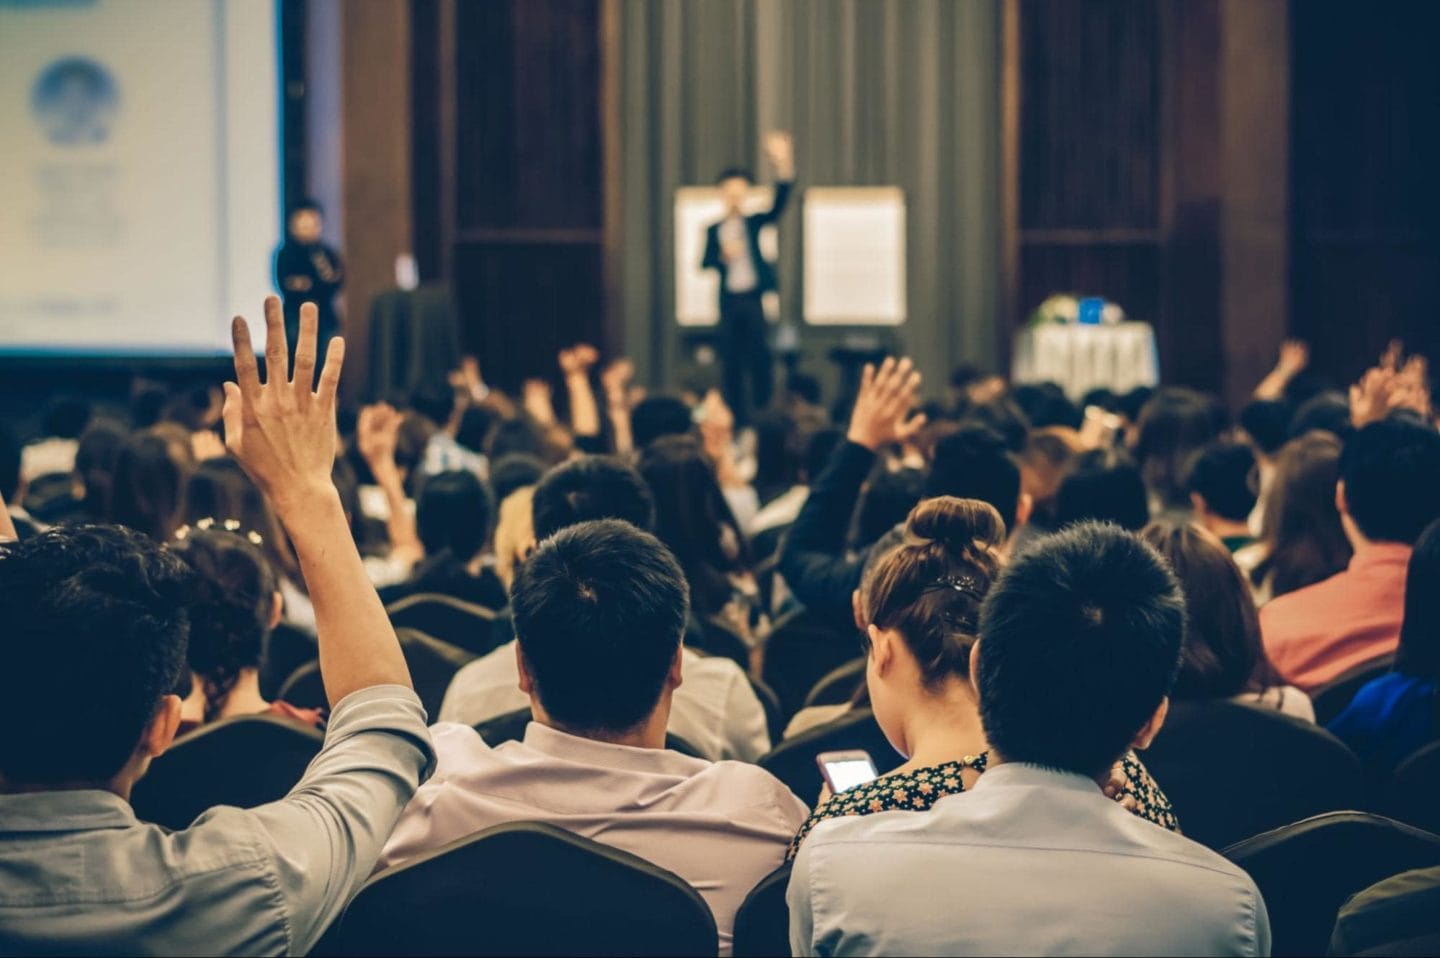 Hands raised in a crowd at a presentation.